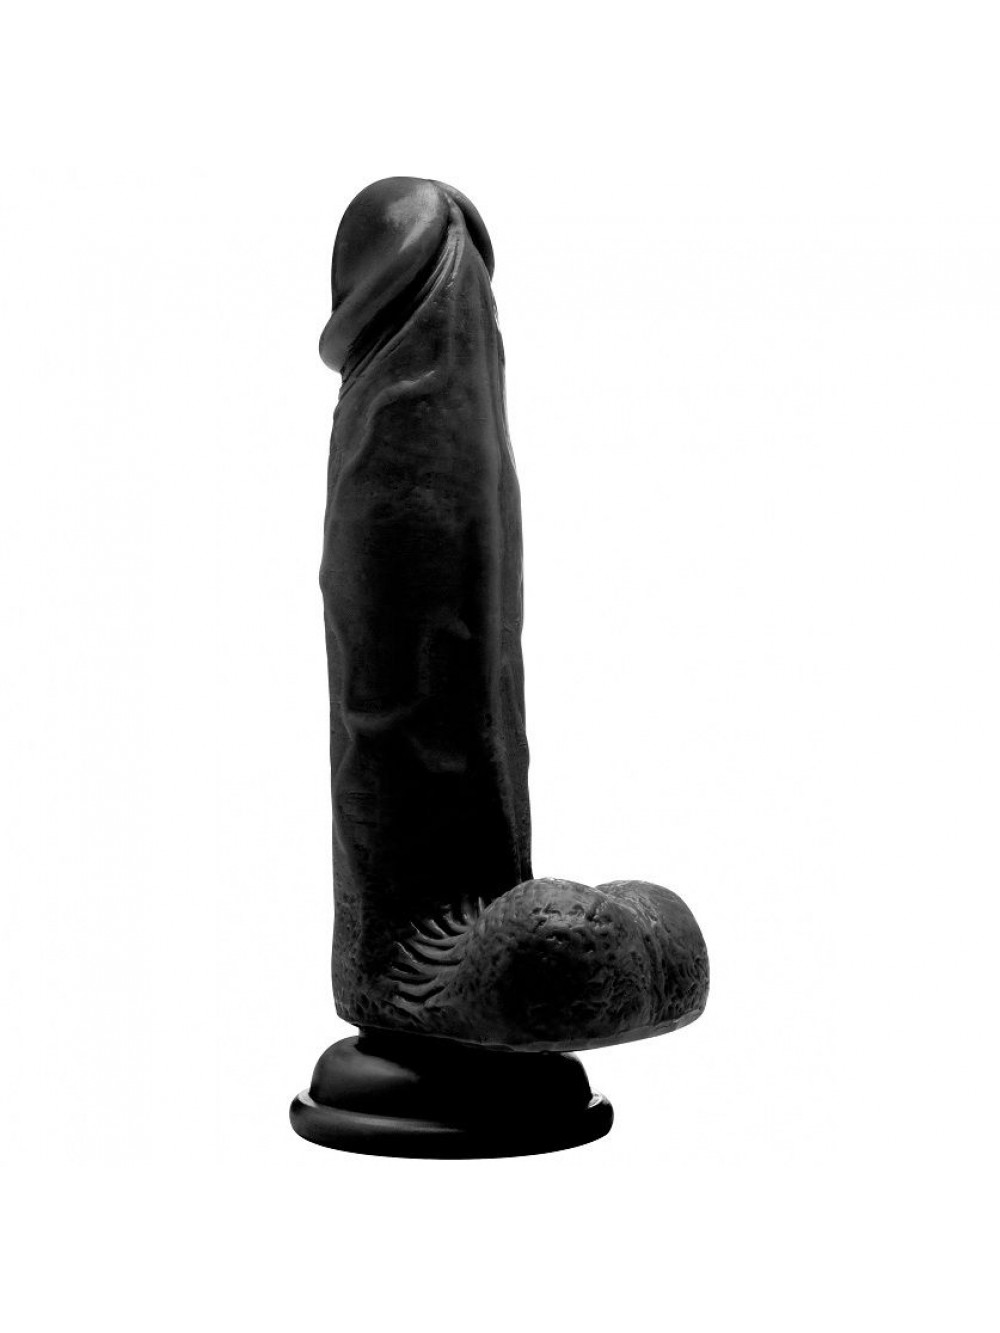 REAL ROCK 015 WITH SCROTUM 20 CM (15CM INS) BLACK